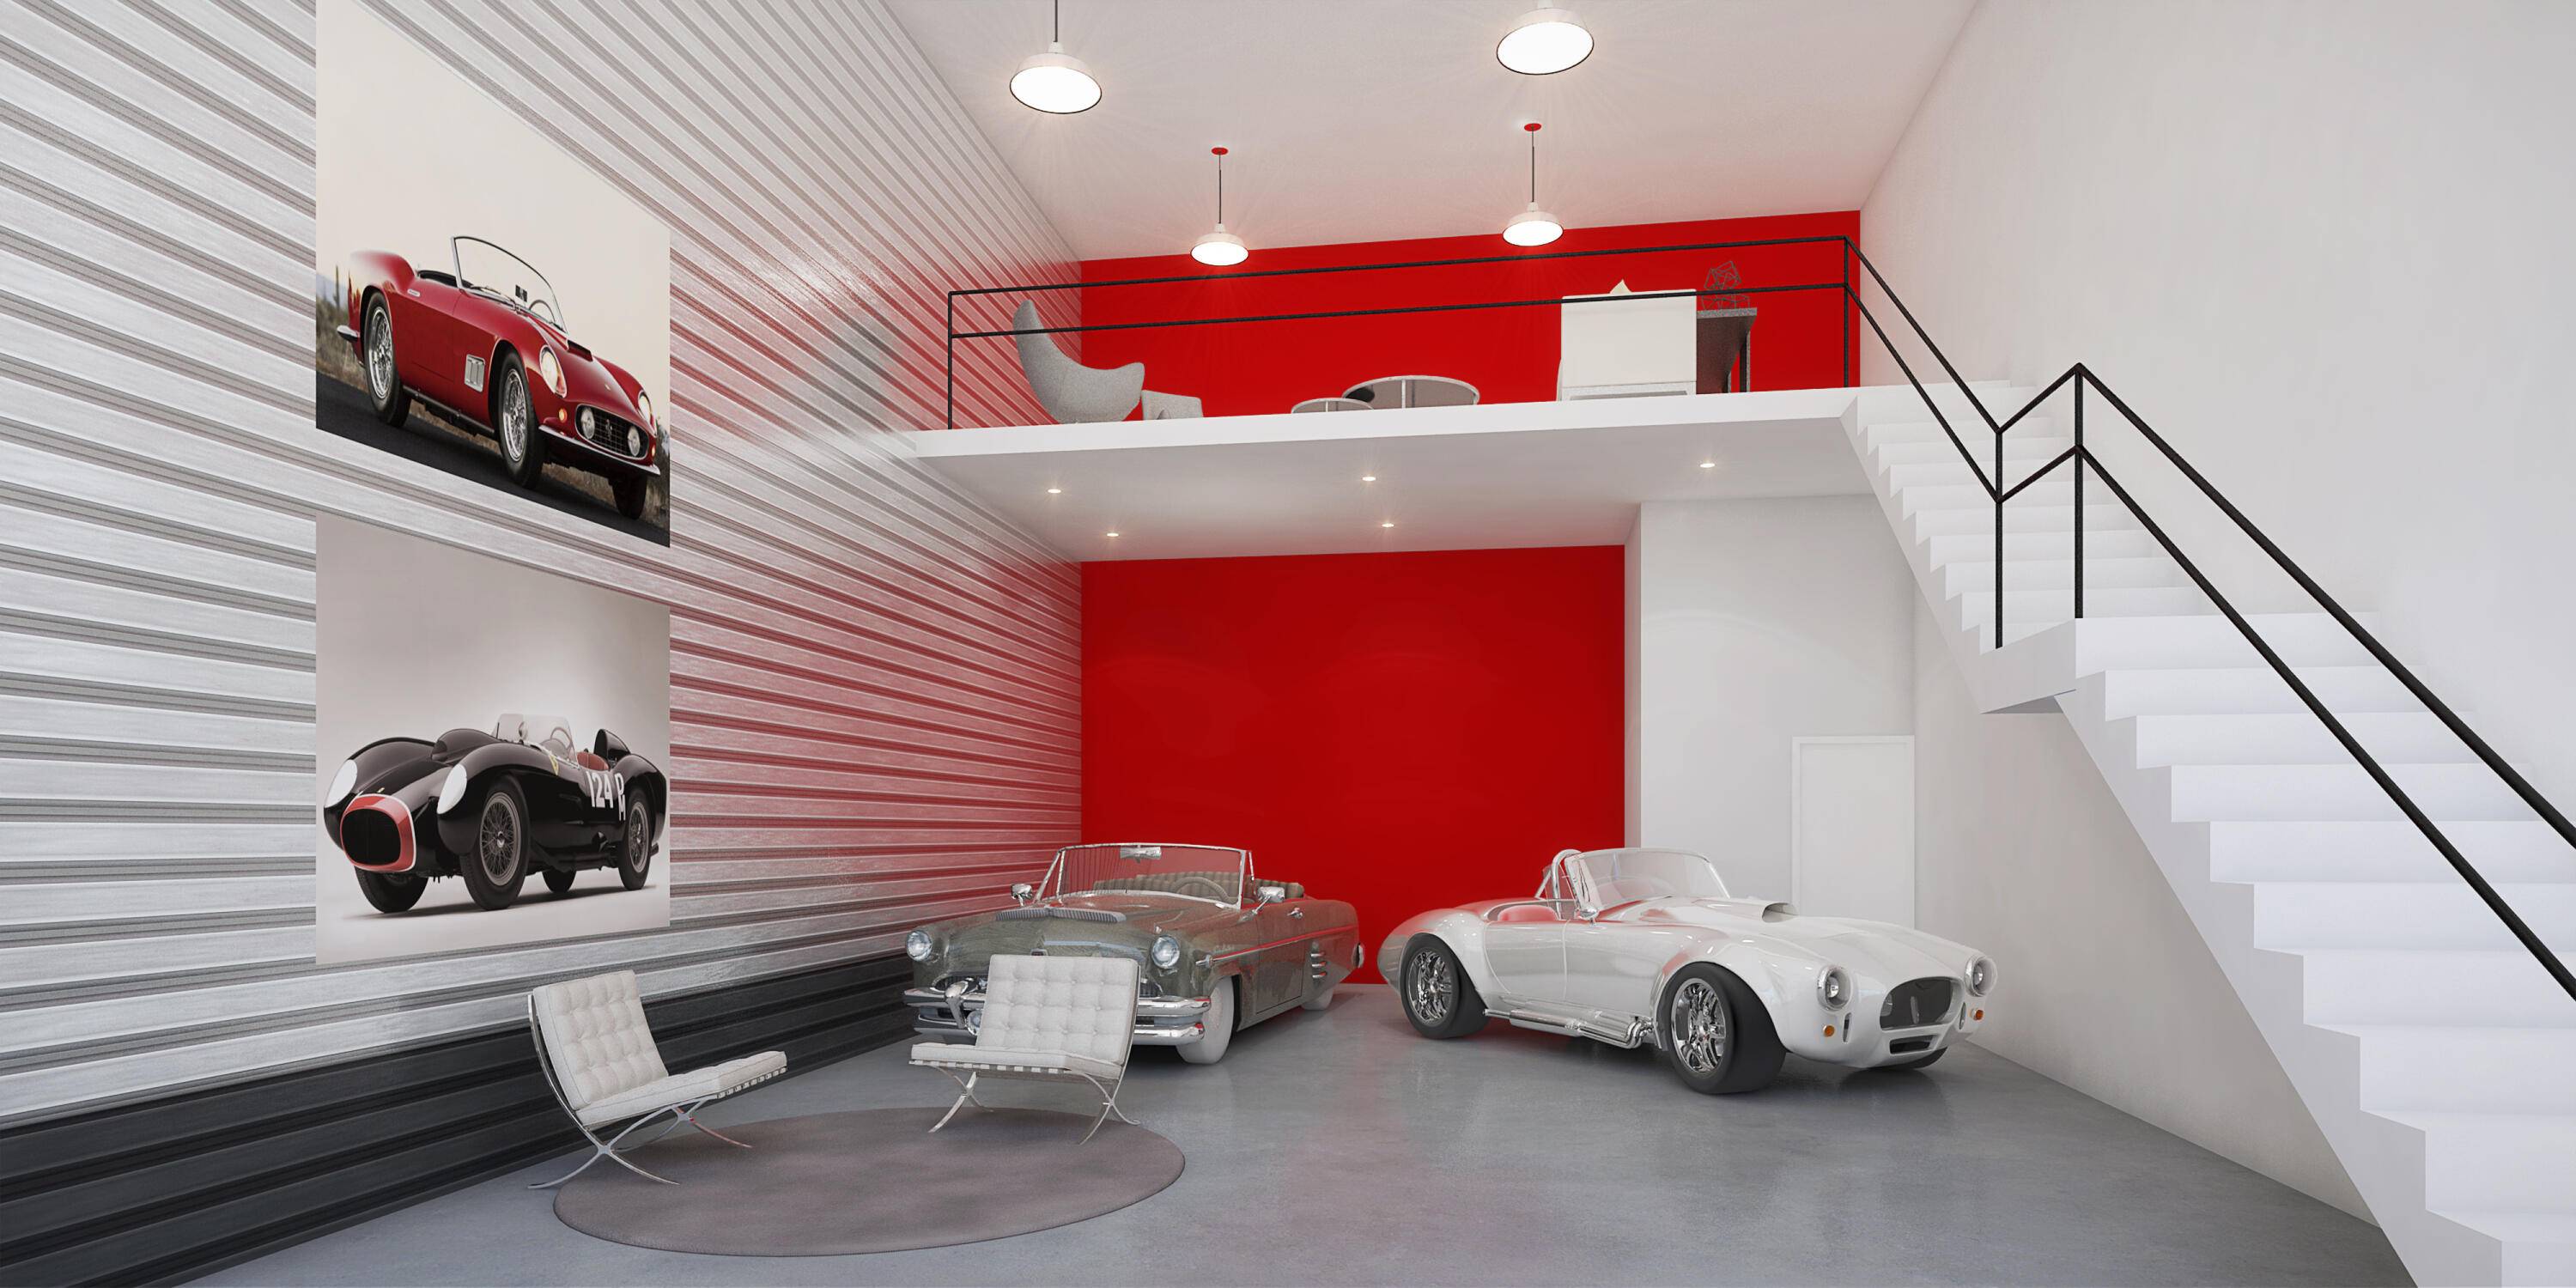 One of a kind Auto Art Gallery built by Bright Homes.